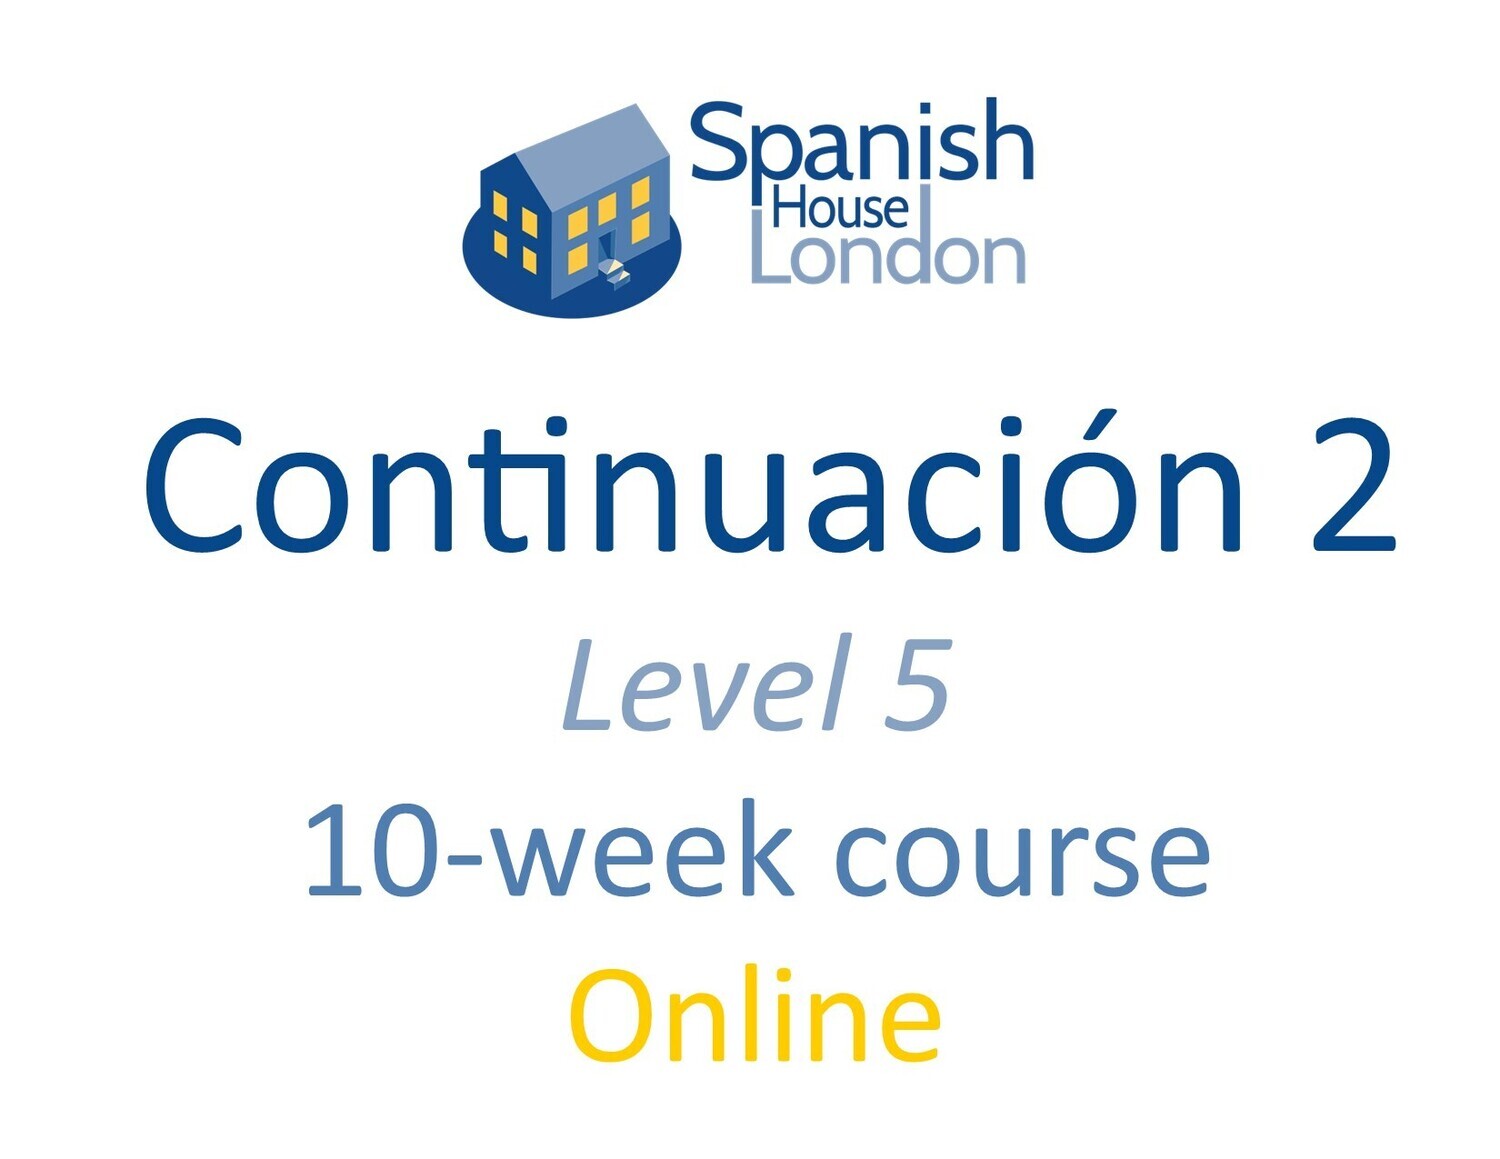 Continuacion 2 Course starting on 6th September at 6pm